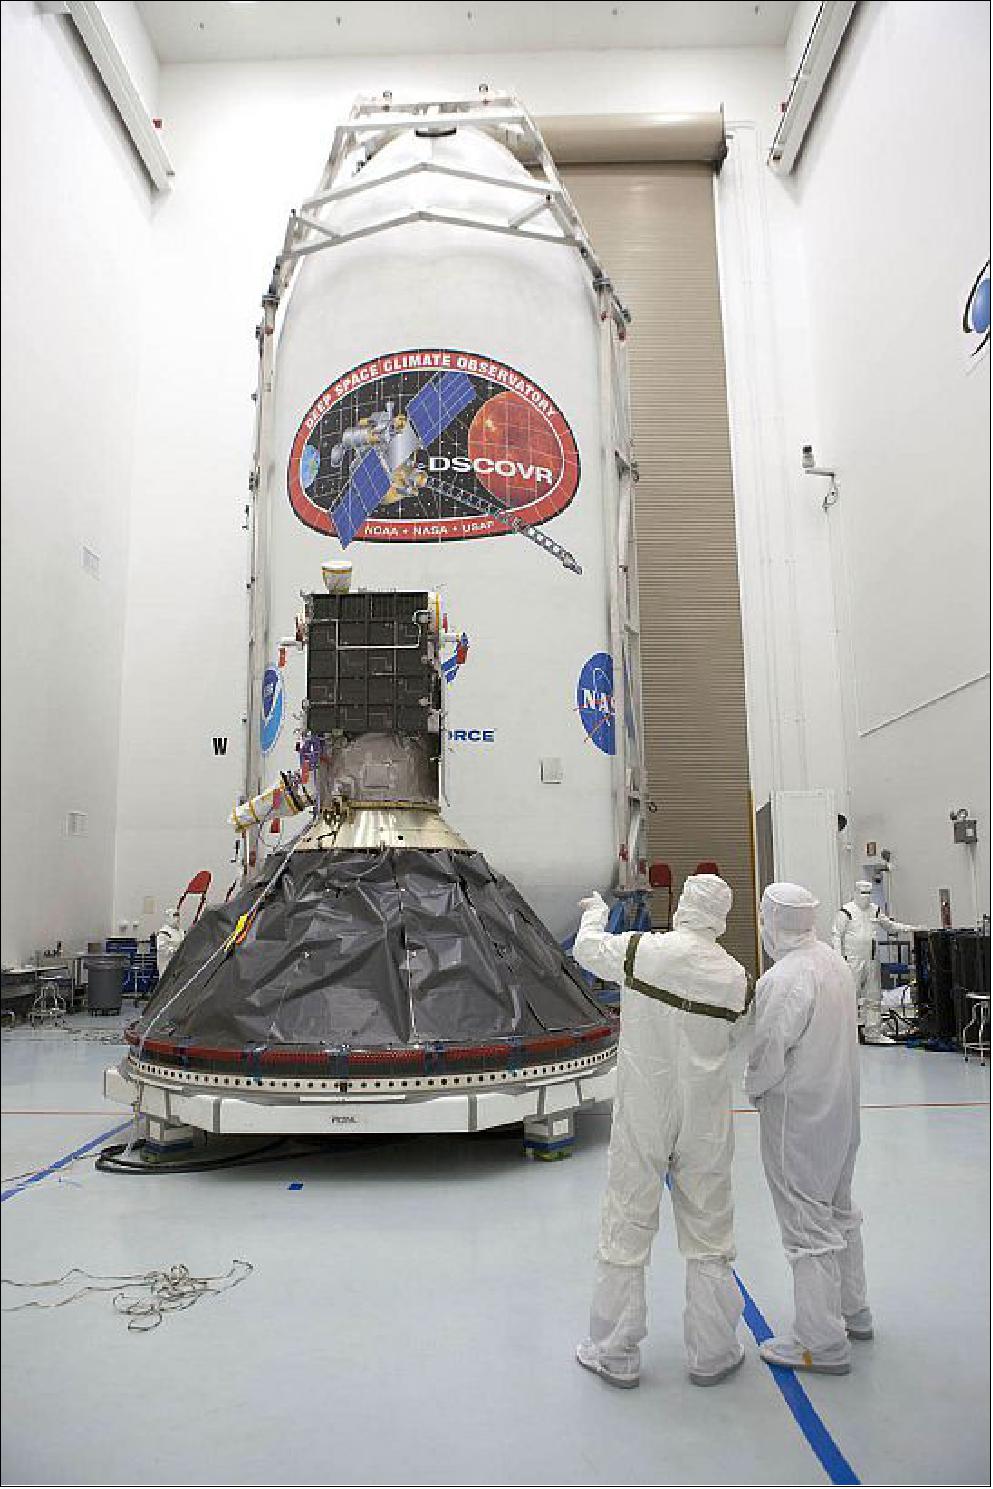 Figure 6: Photo of the preparations of NOAA's DSCOVR spacecraft in the Astrotech payload processing facility of Titusville, FL (image credit: NASA)